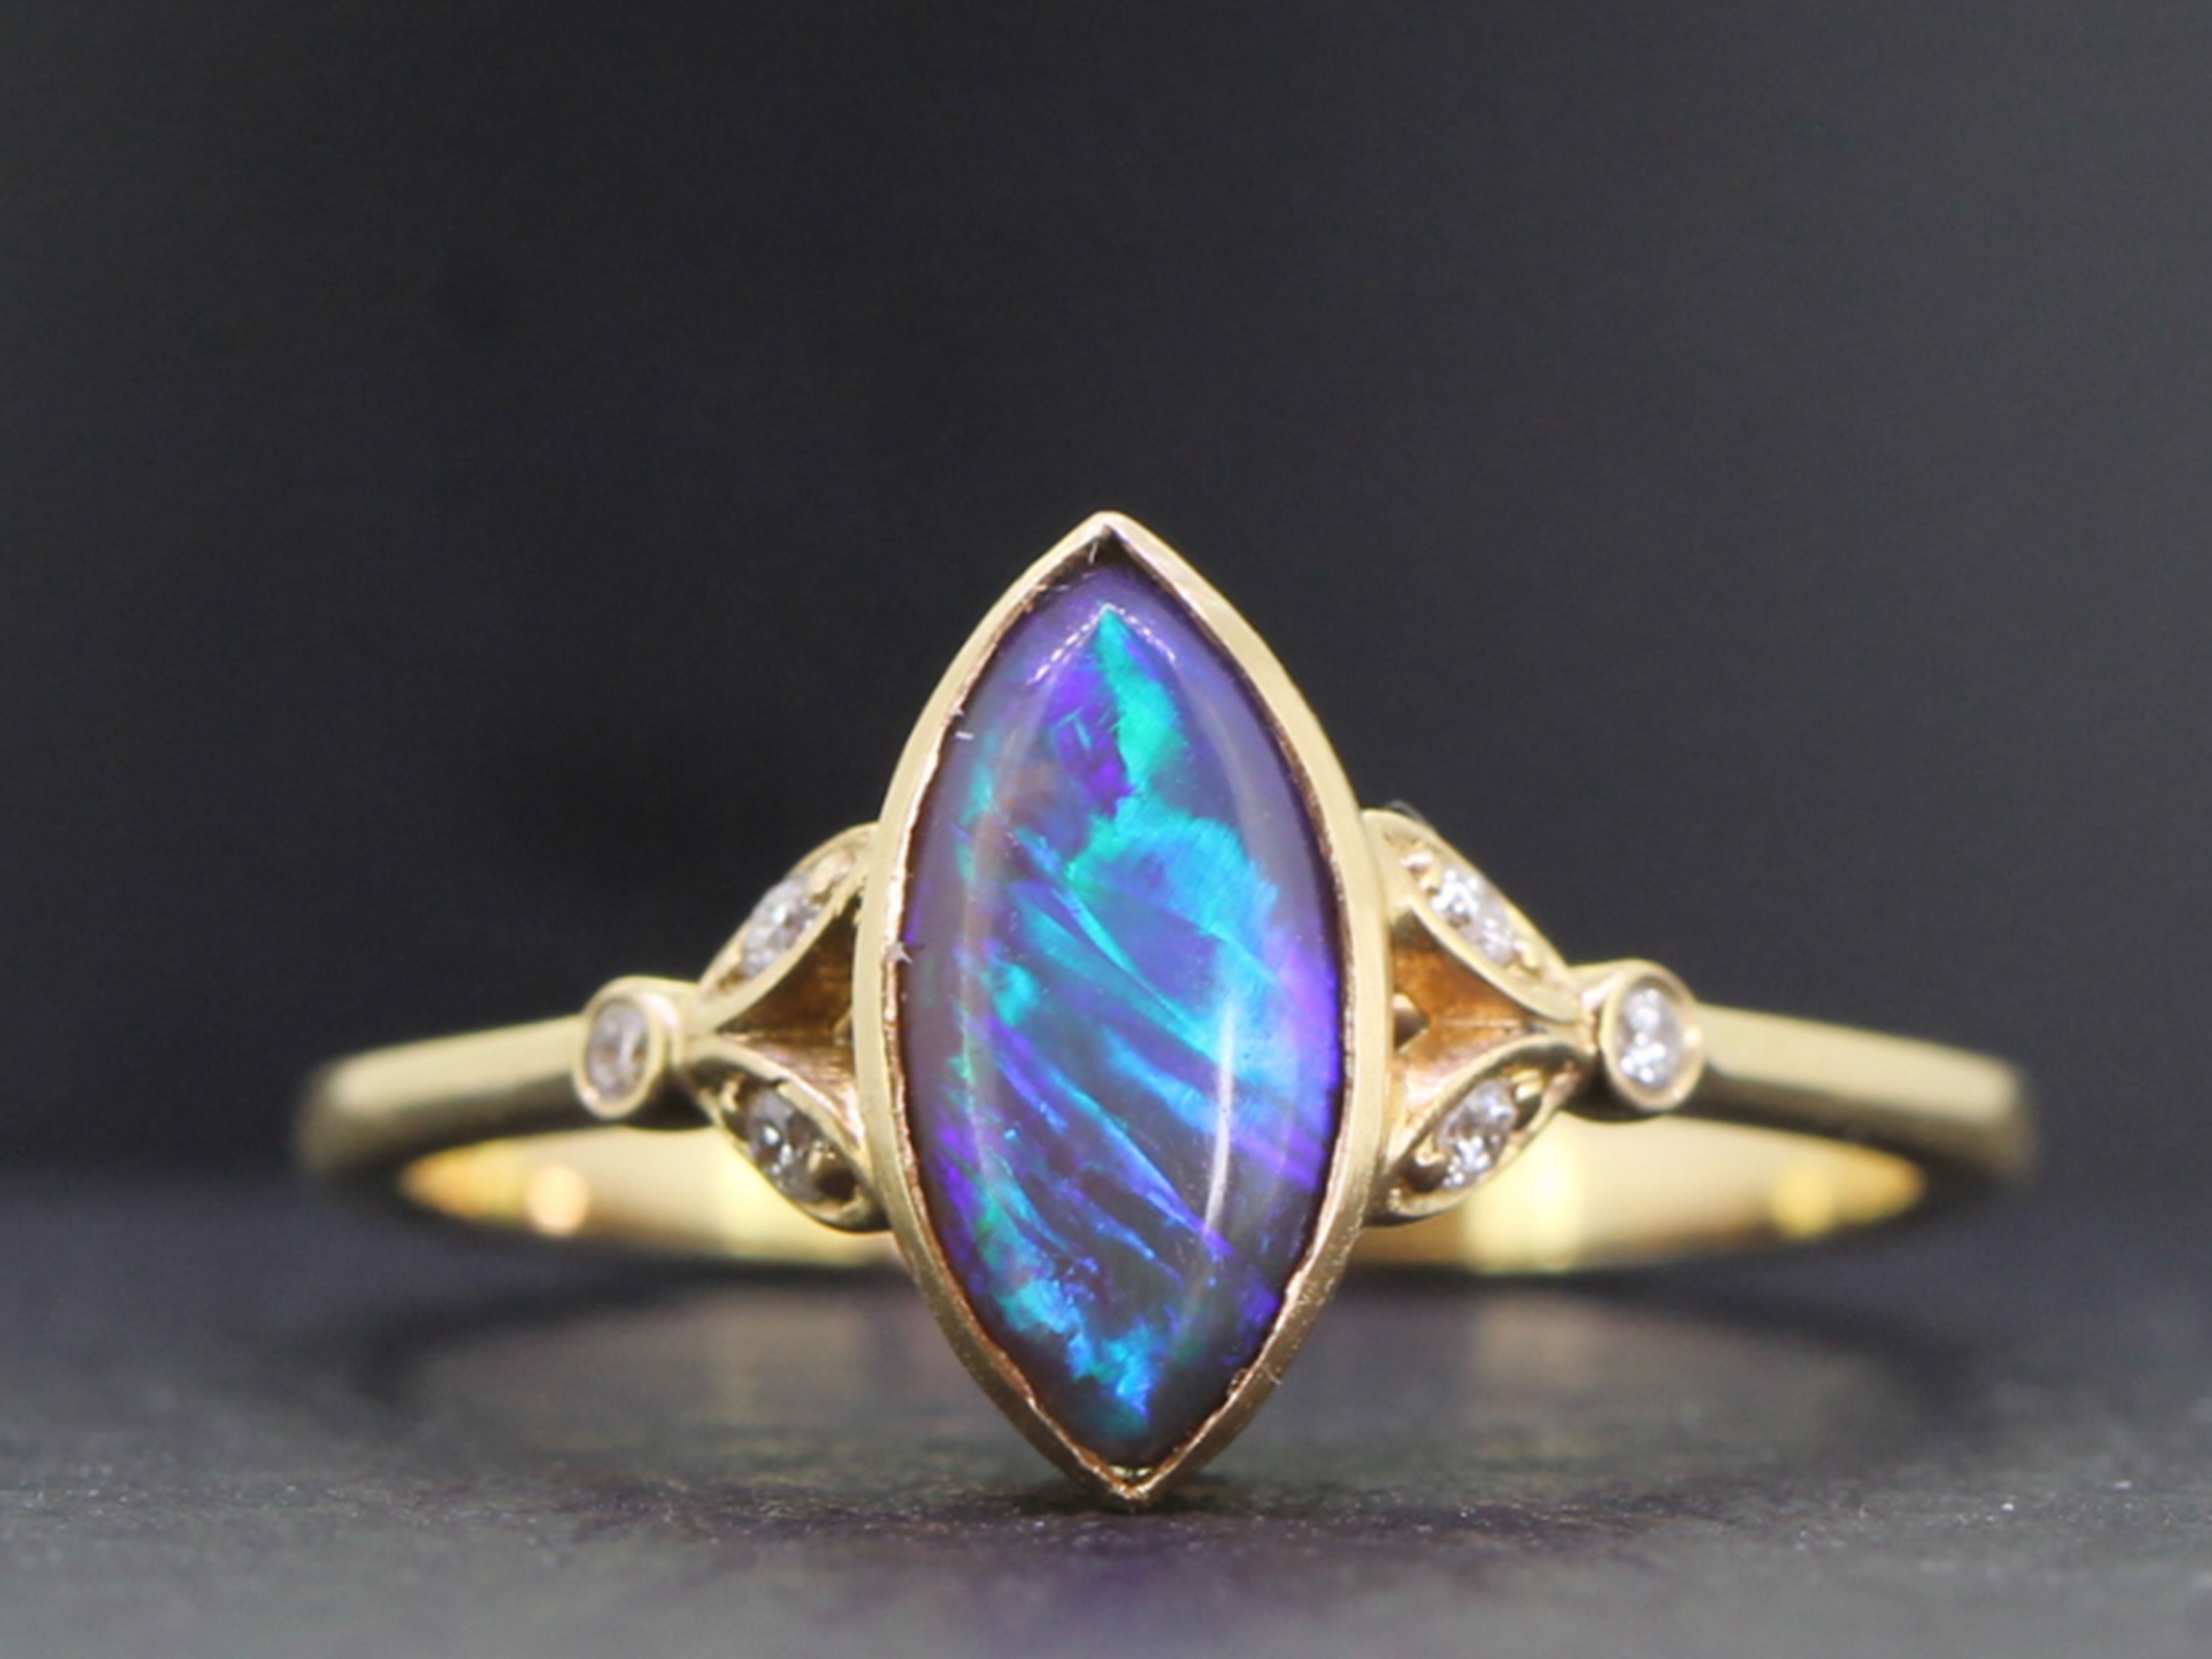 Stunning solid black opal and diamond 14 carat ring